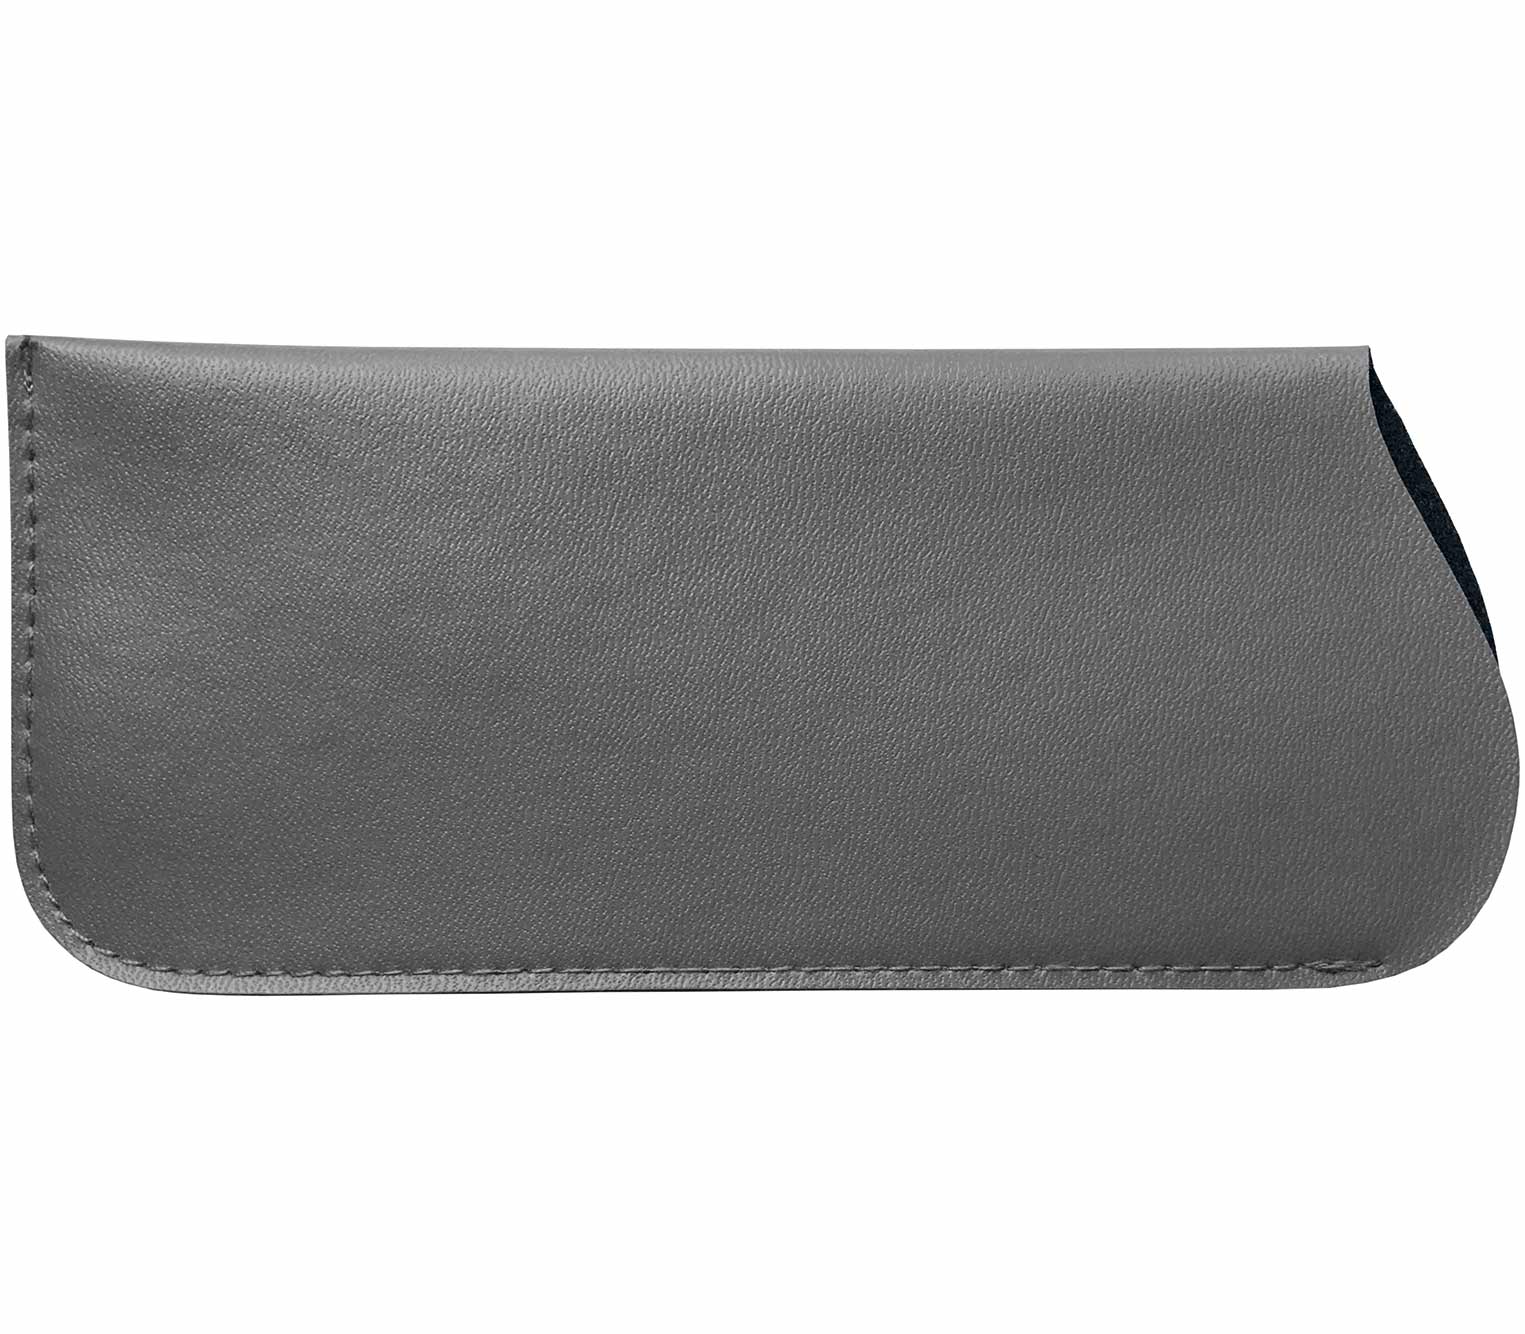 Main Image (Angle) - Laser (Grey) Glasses Pouches Accessories